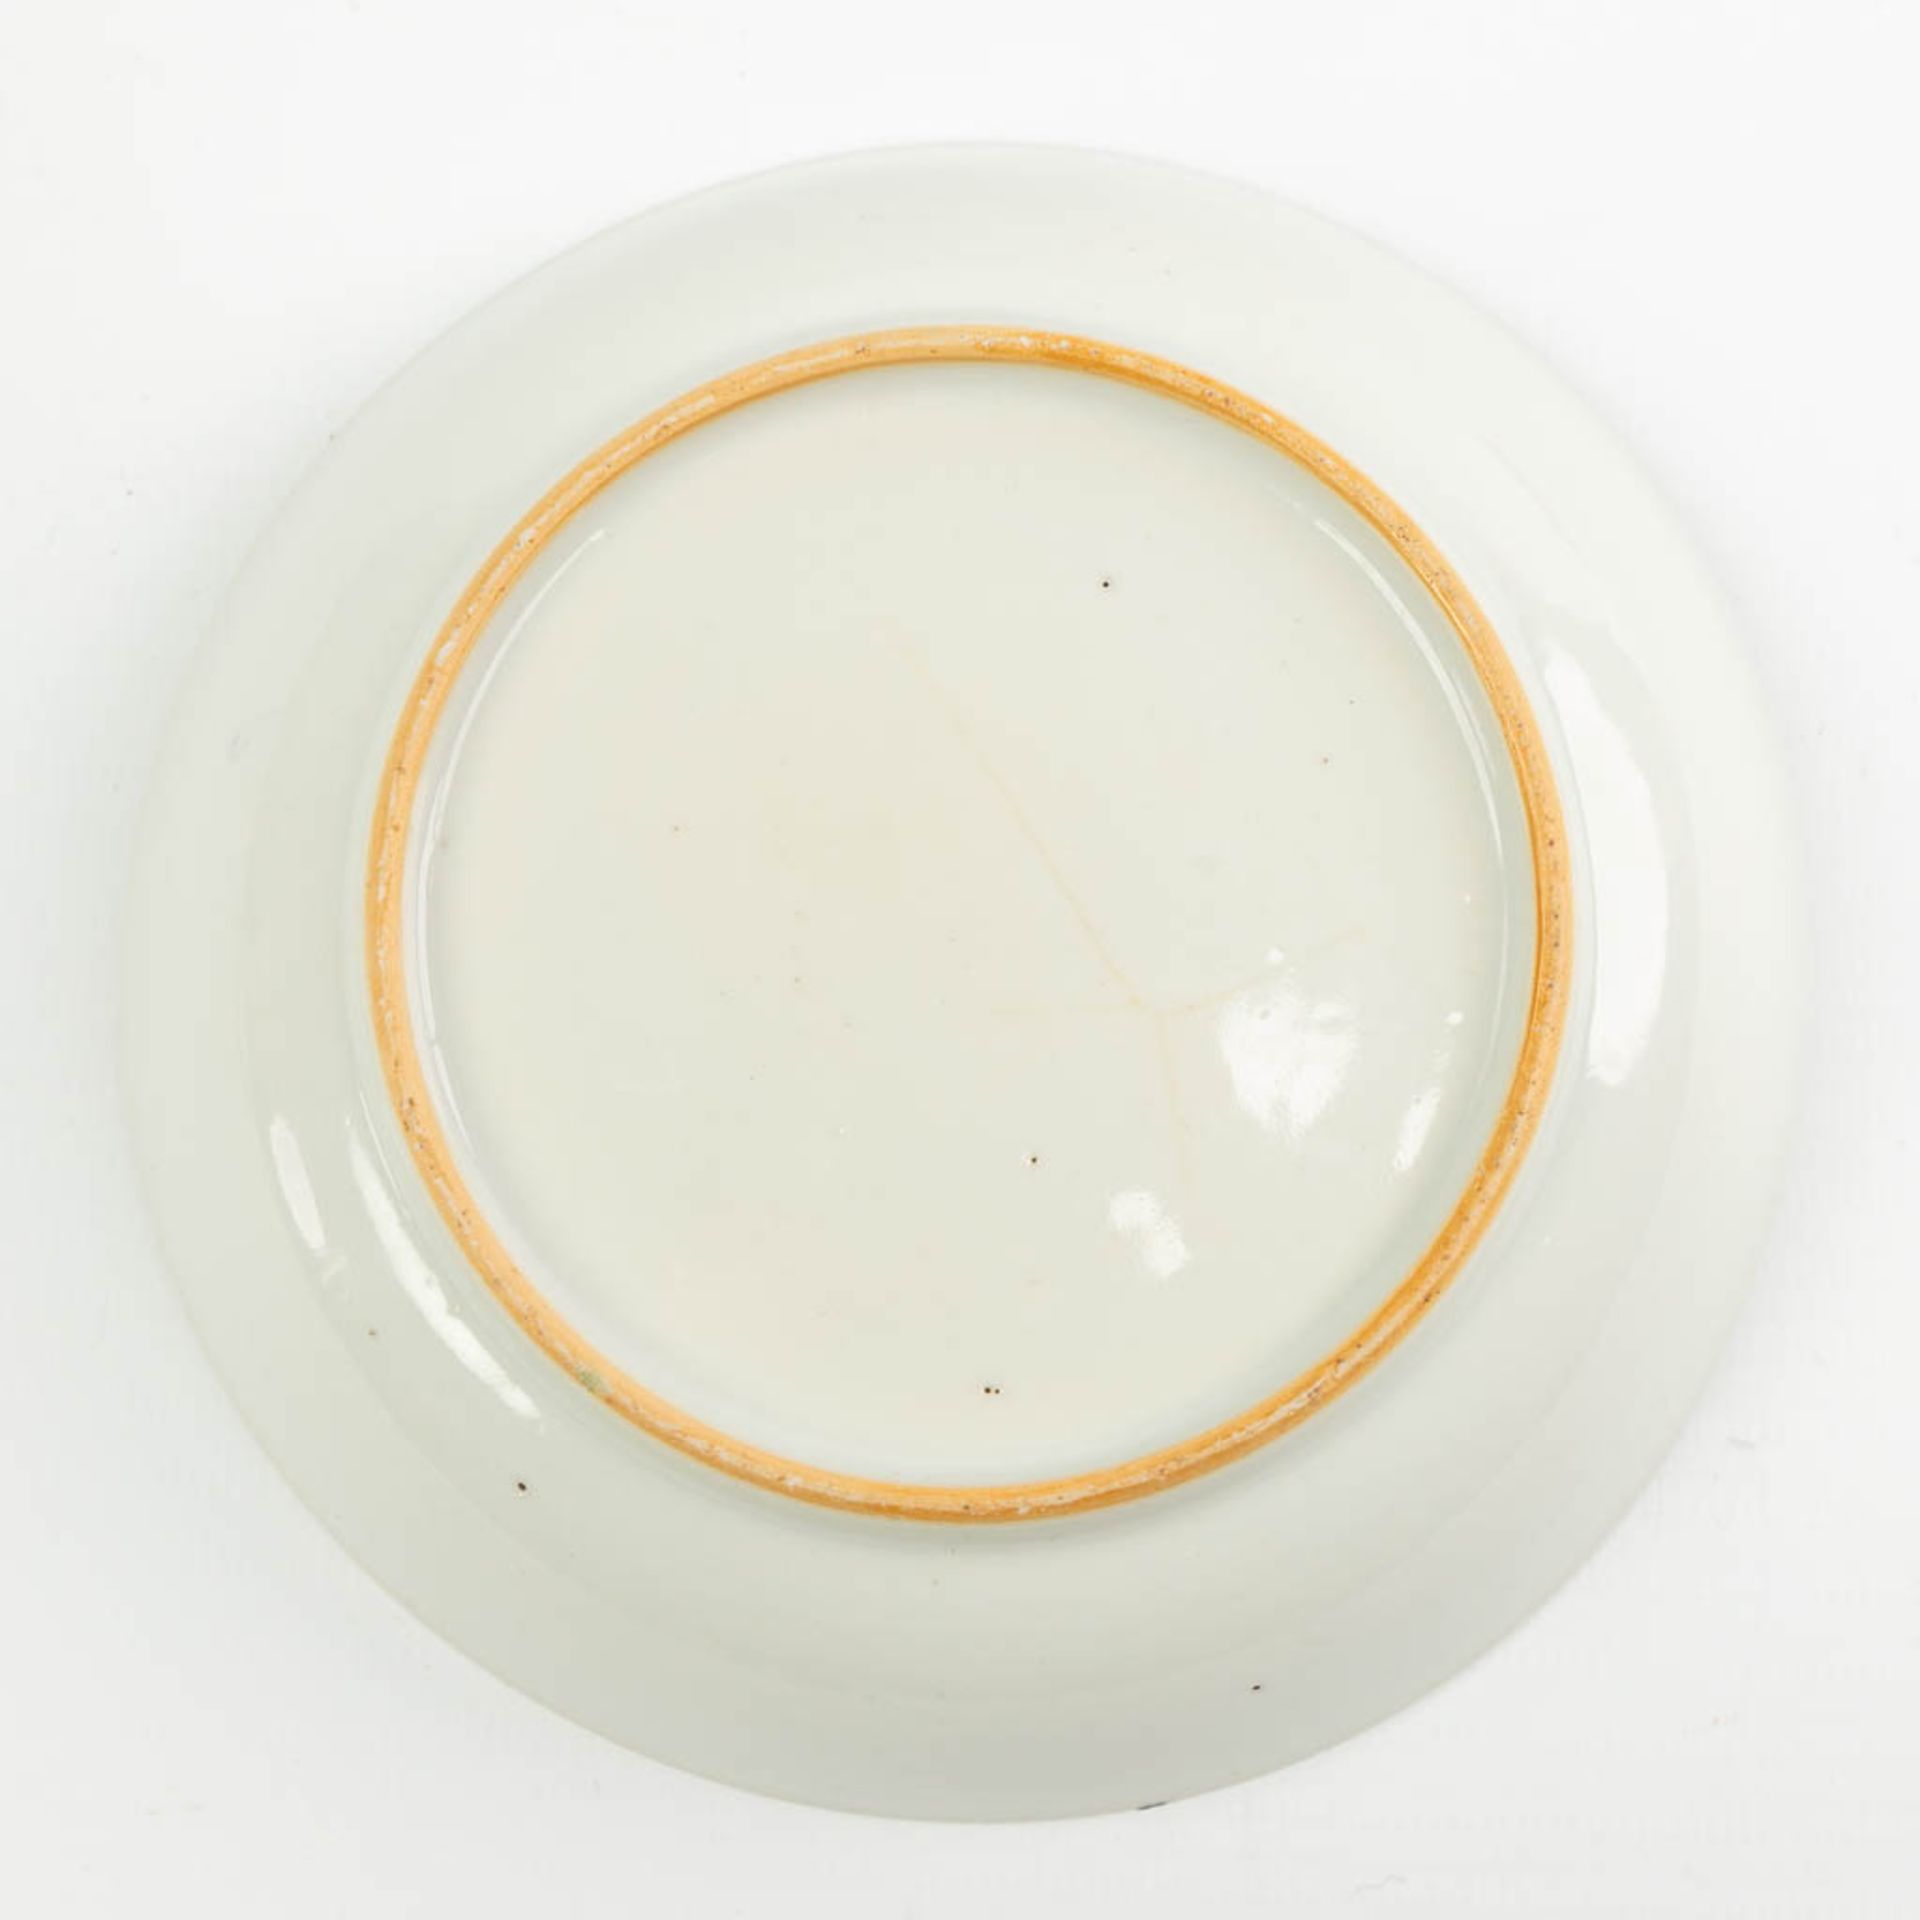 A collection of 5 plates made of Chinese porcelain with different patterns. - Image 10 of 15